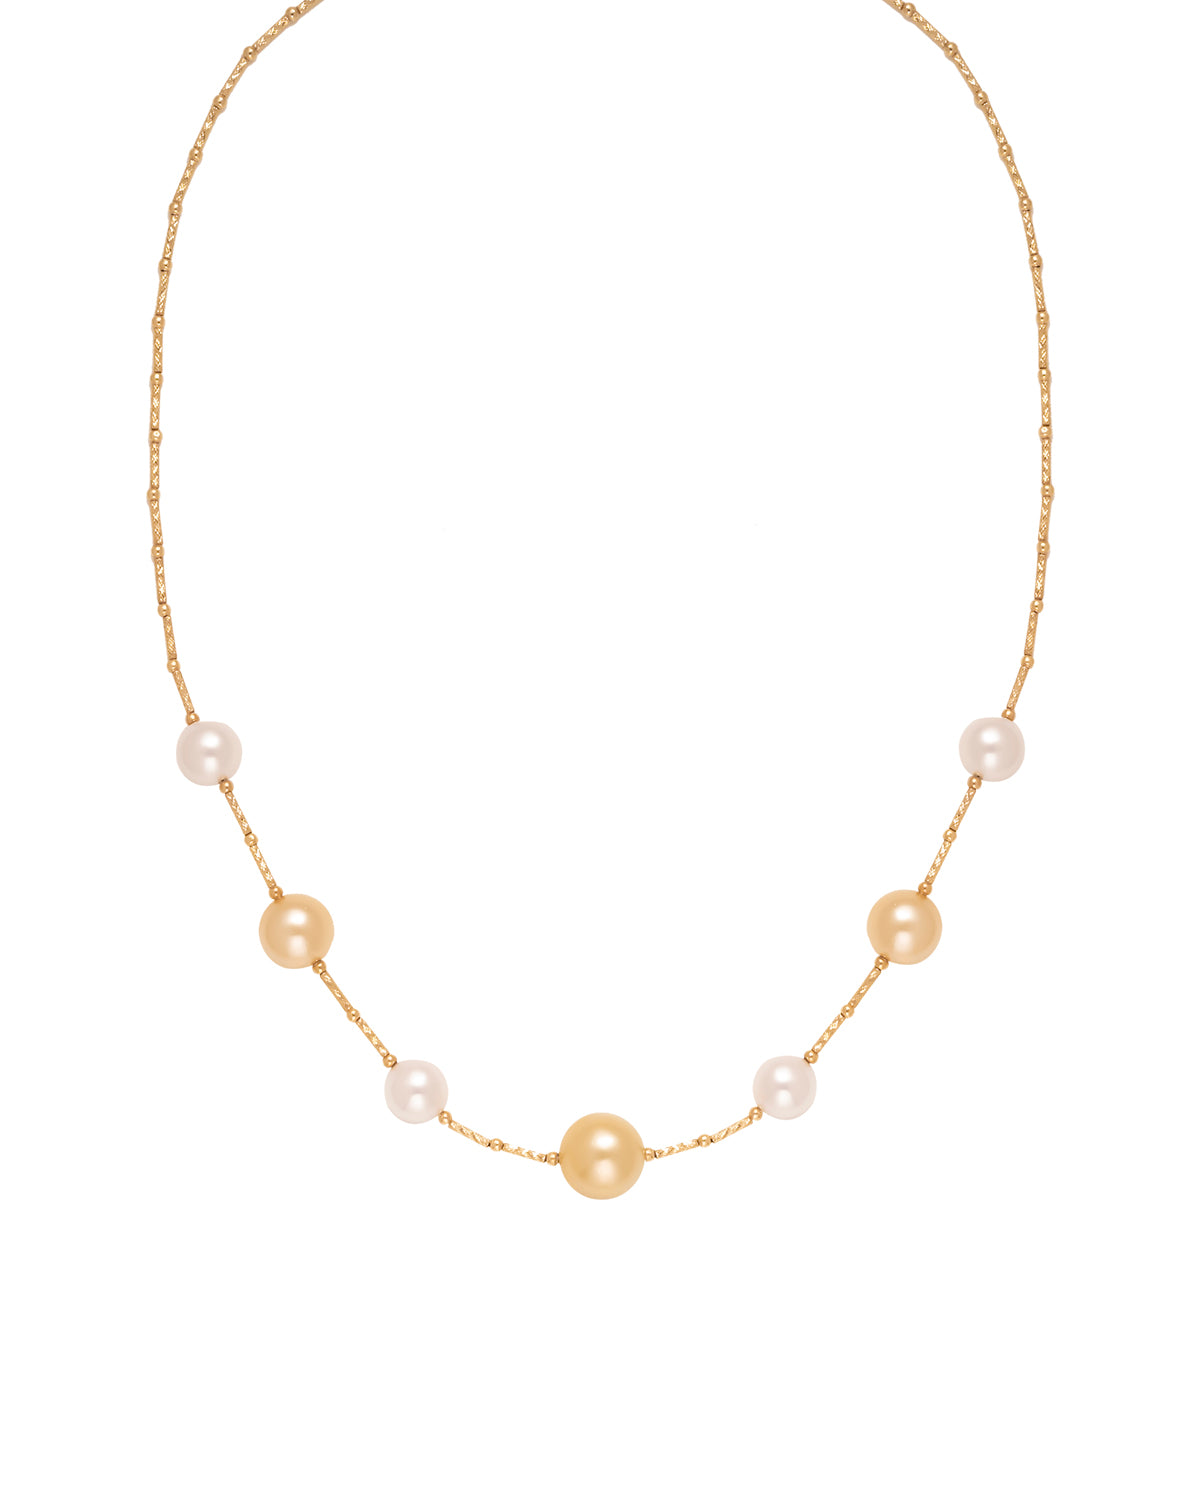 White Akoya & Golden South Sea Pearl Tincup Necklace